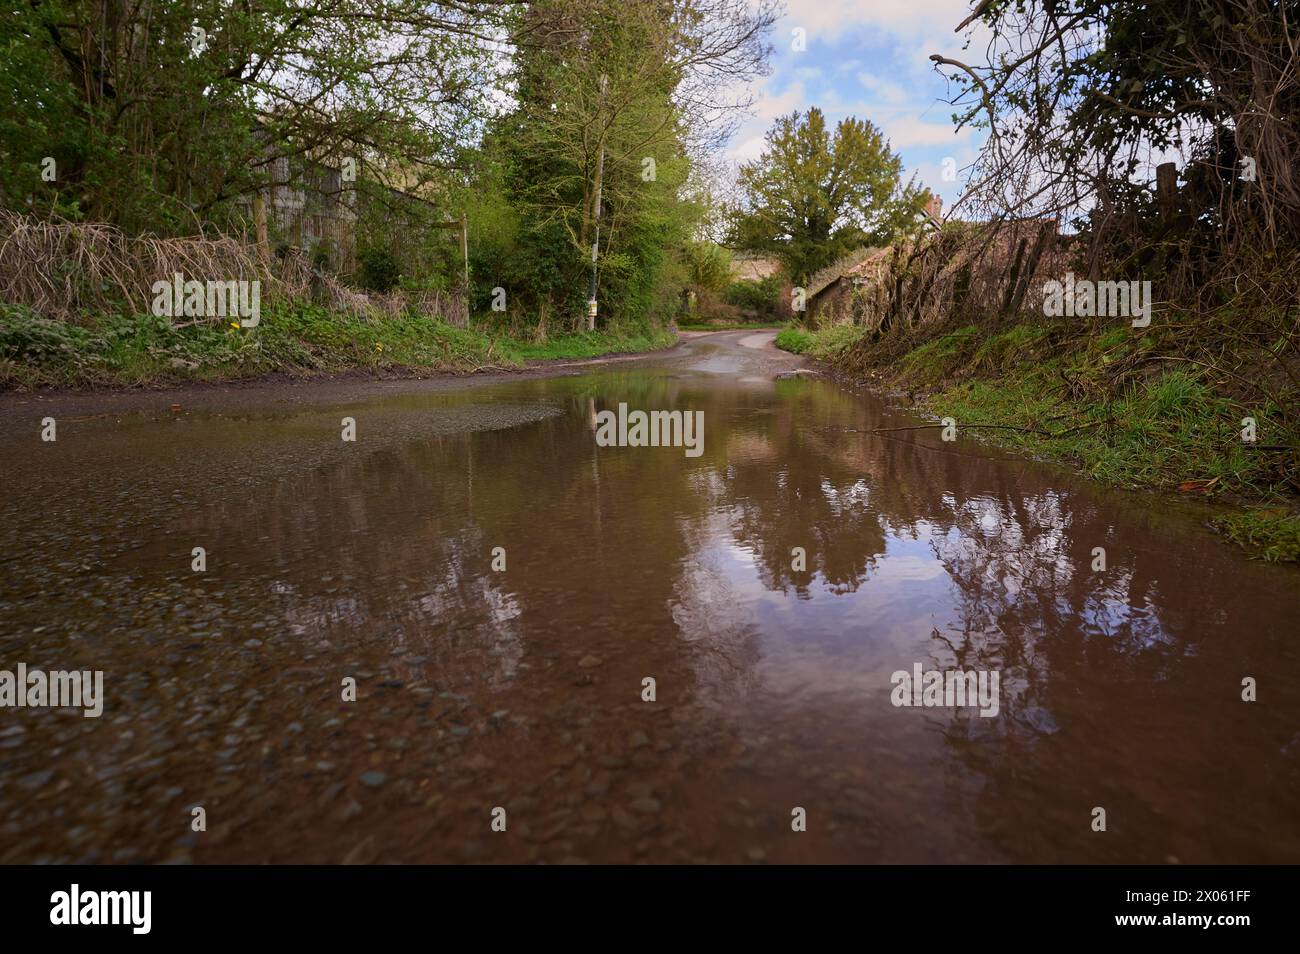 ground level image of brown water puddle in road in english countryside next to grass verge and hedgerow Stock Photo